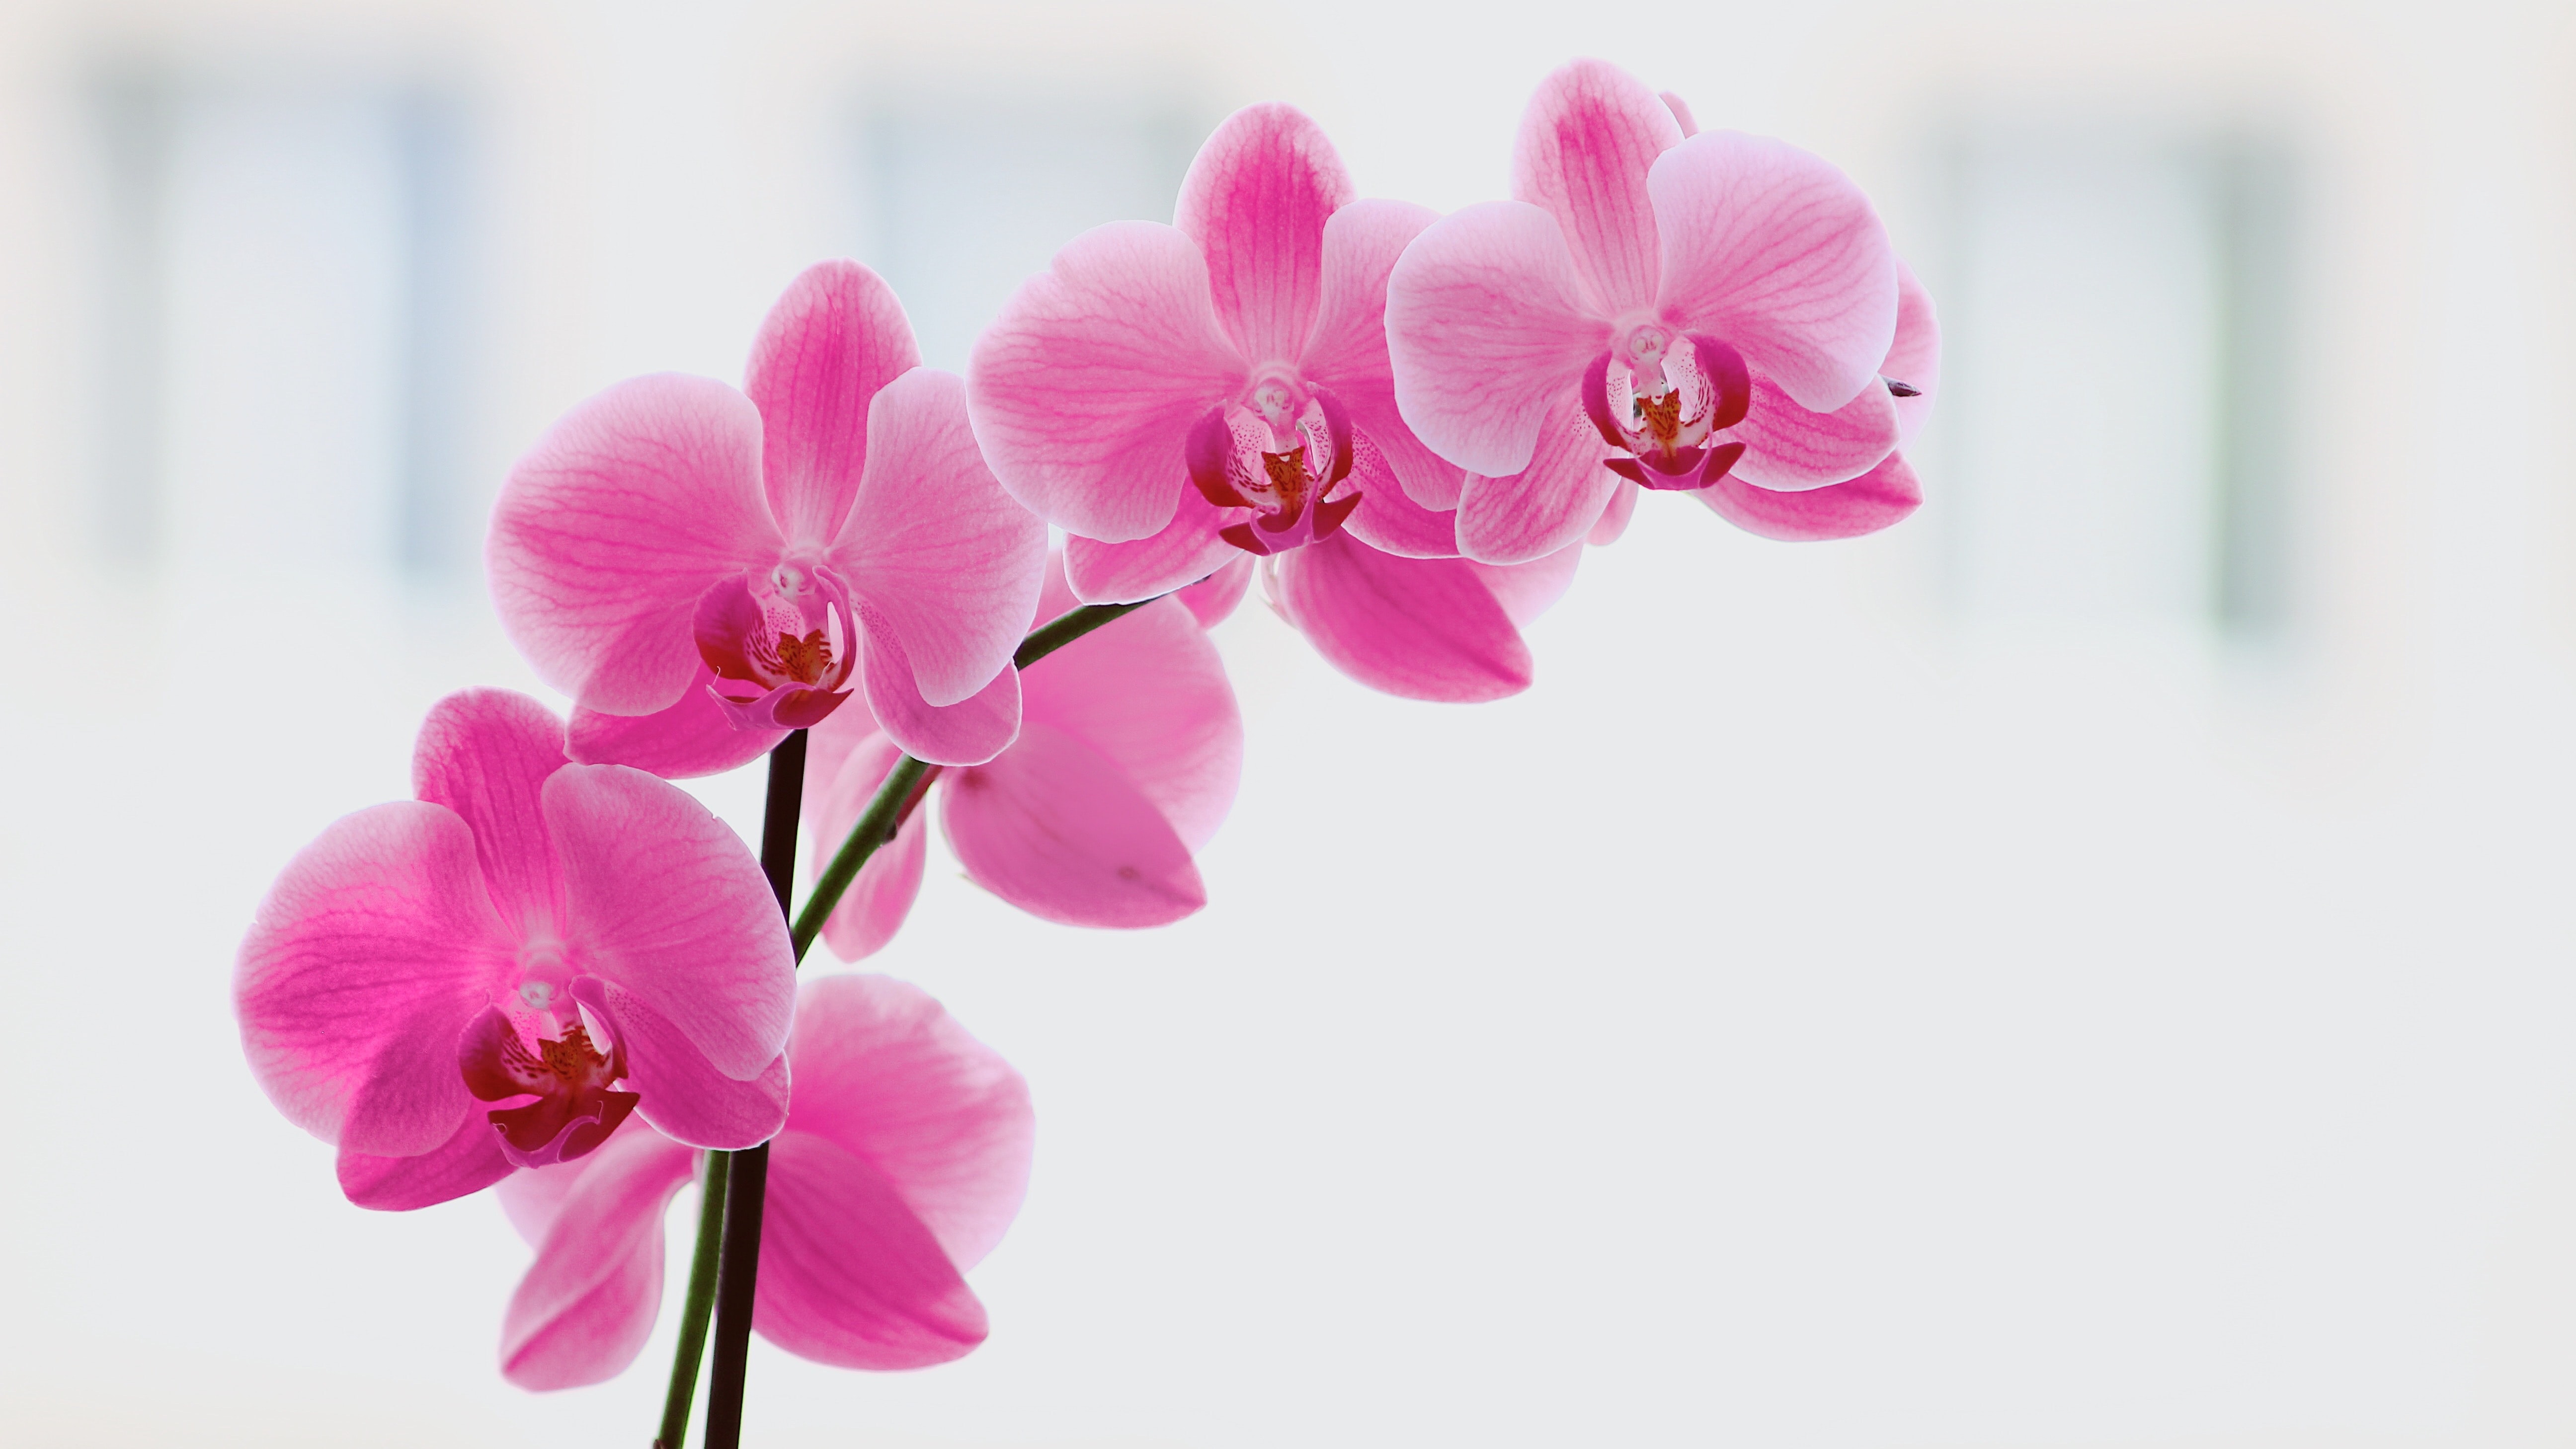 Orchids are among the best flowers for wedding centerpieces